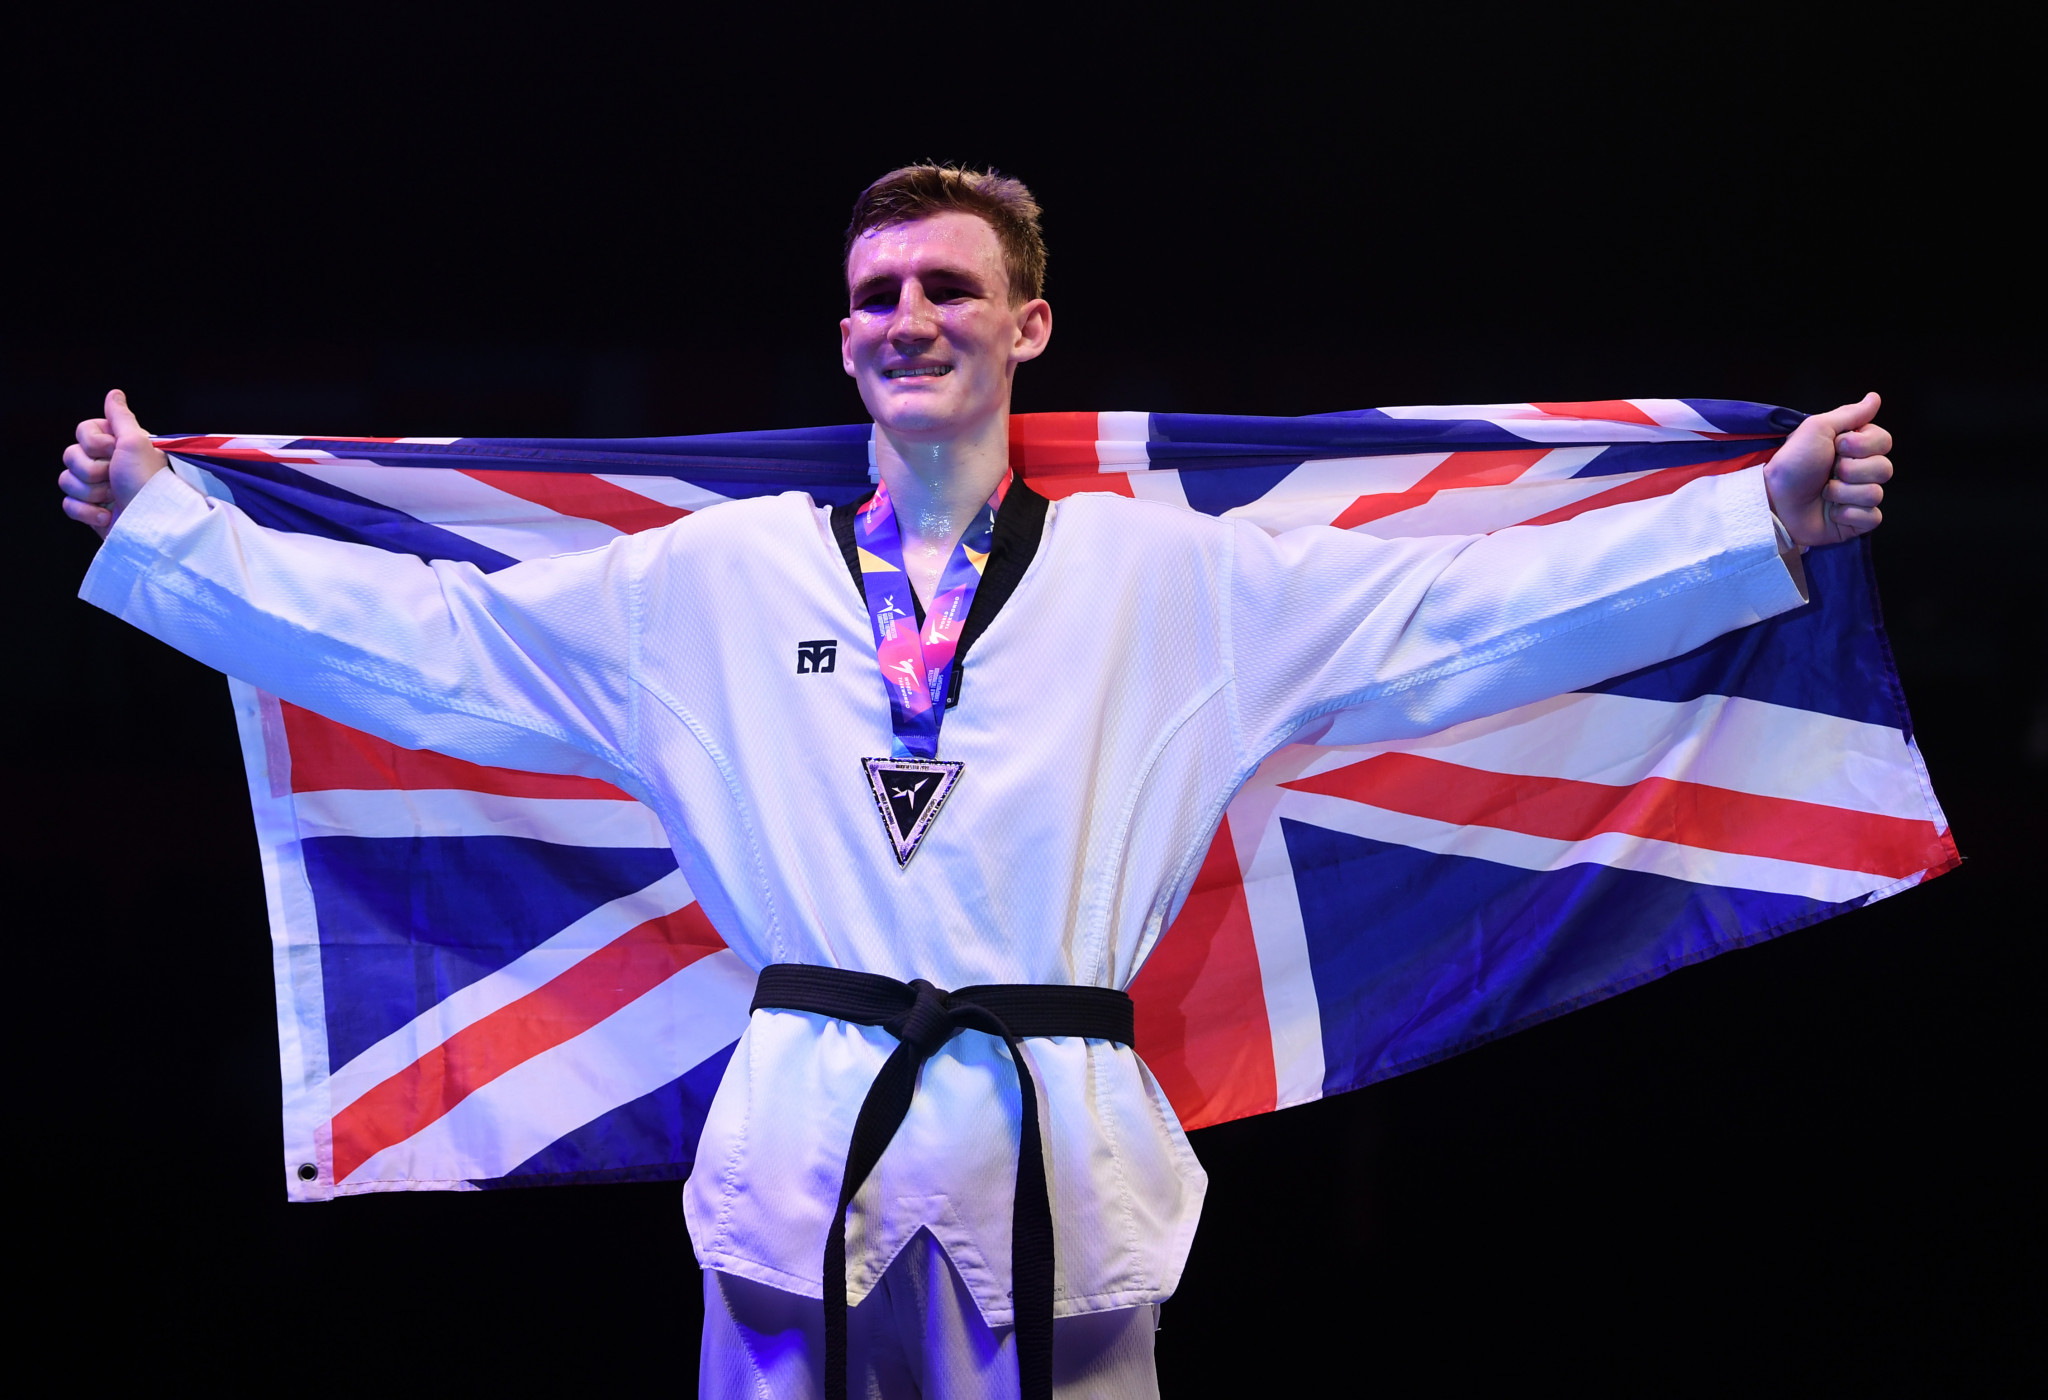 Britain also won gold through Bradly Sinden in the men's under-68kg and he became the first British male taekwondo world champion ©Getty Images